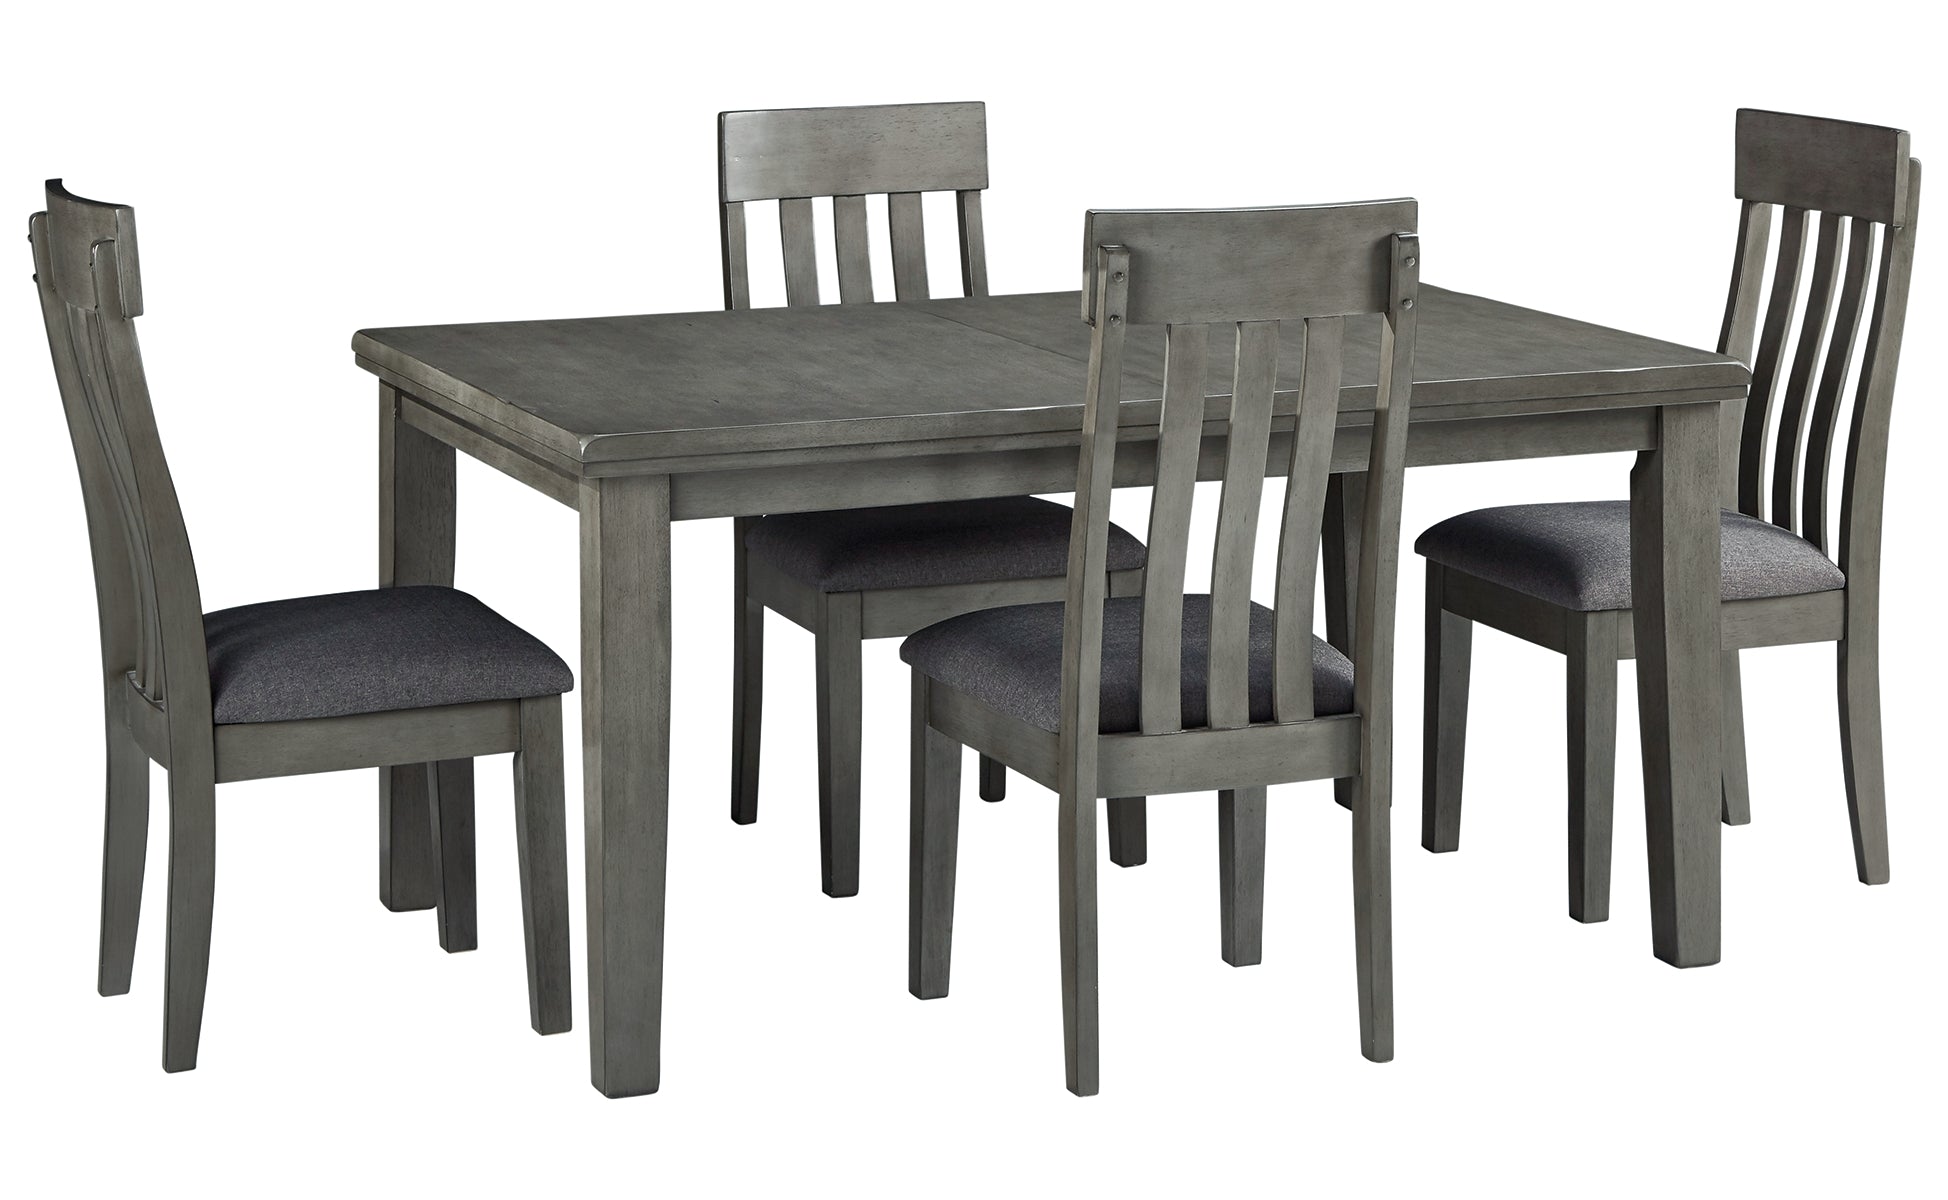 Hallanden Dining Table and 4 Chairs